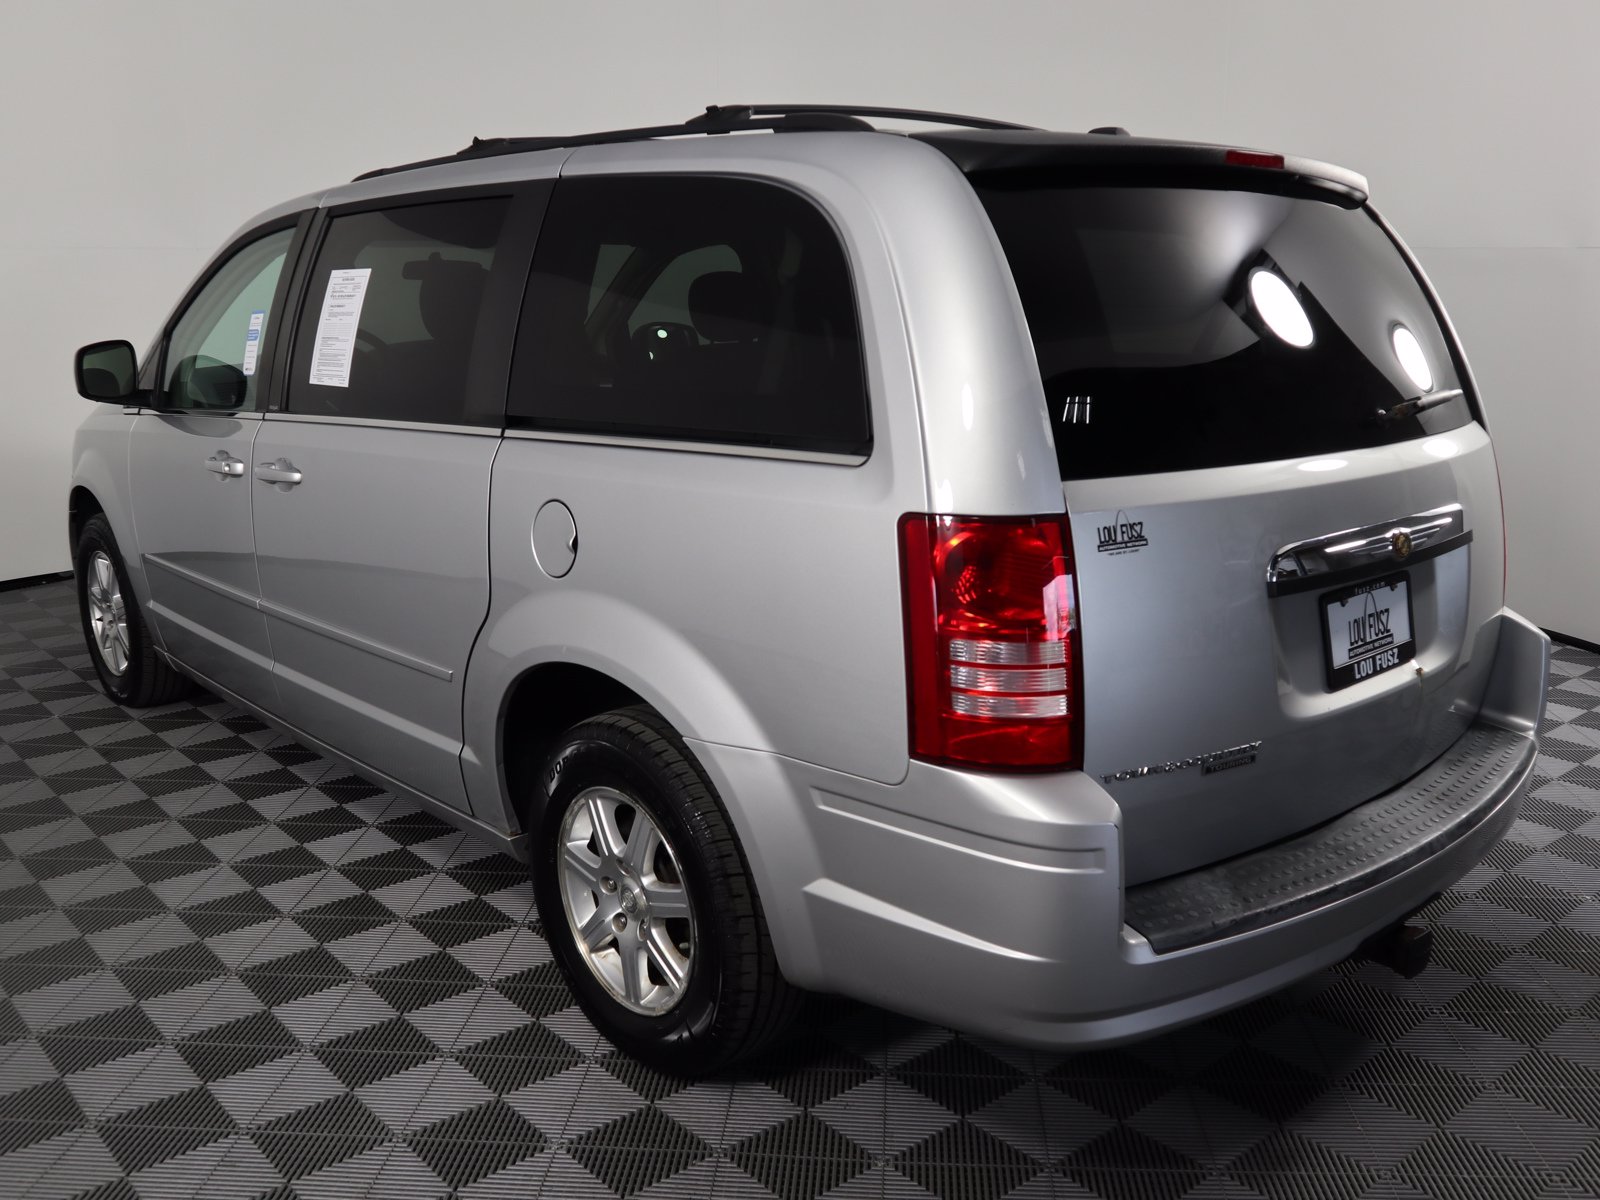 PreOwned 2008 Chrysler Town & Country Touring FWD Mini